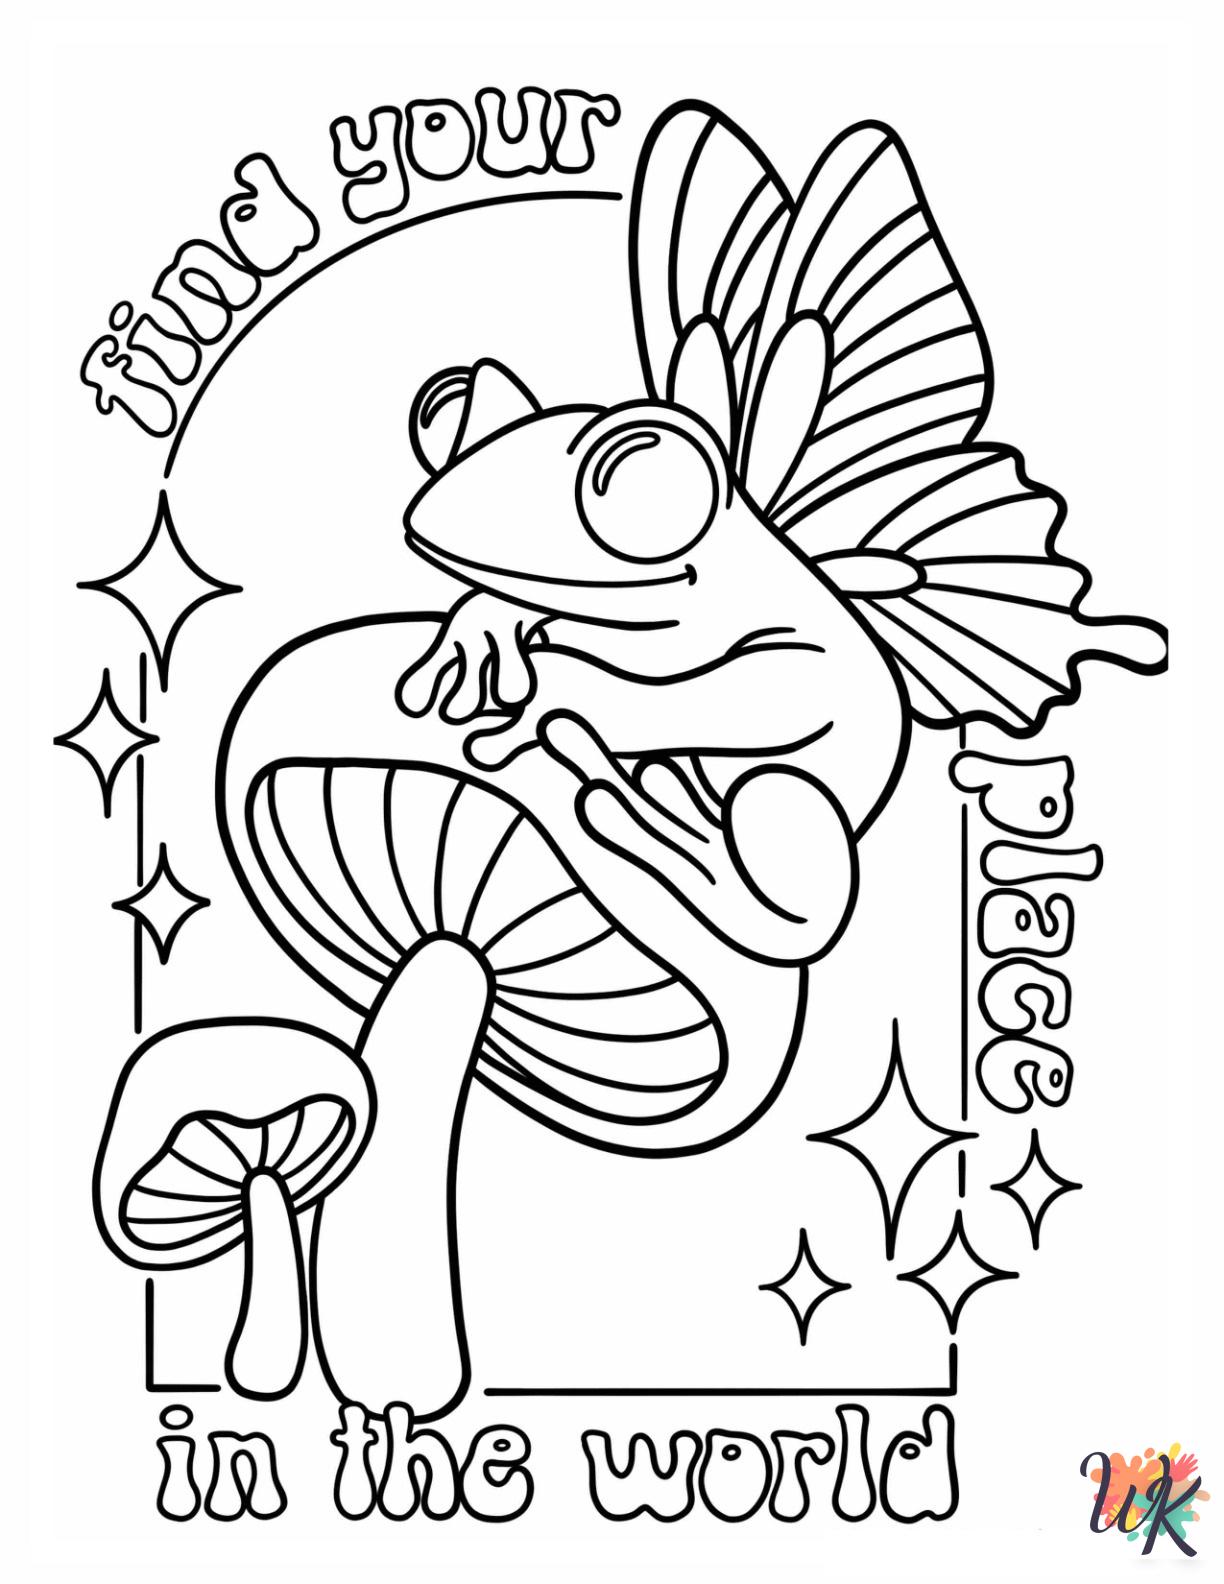 Aesthetic adult coloring pages